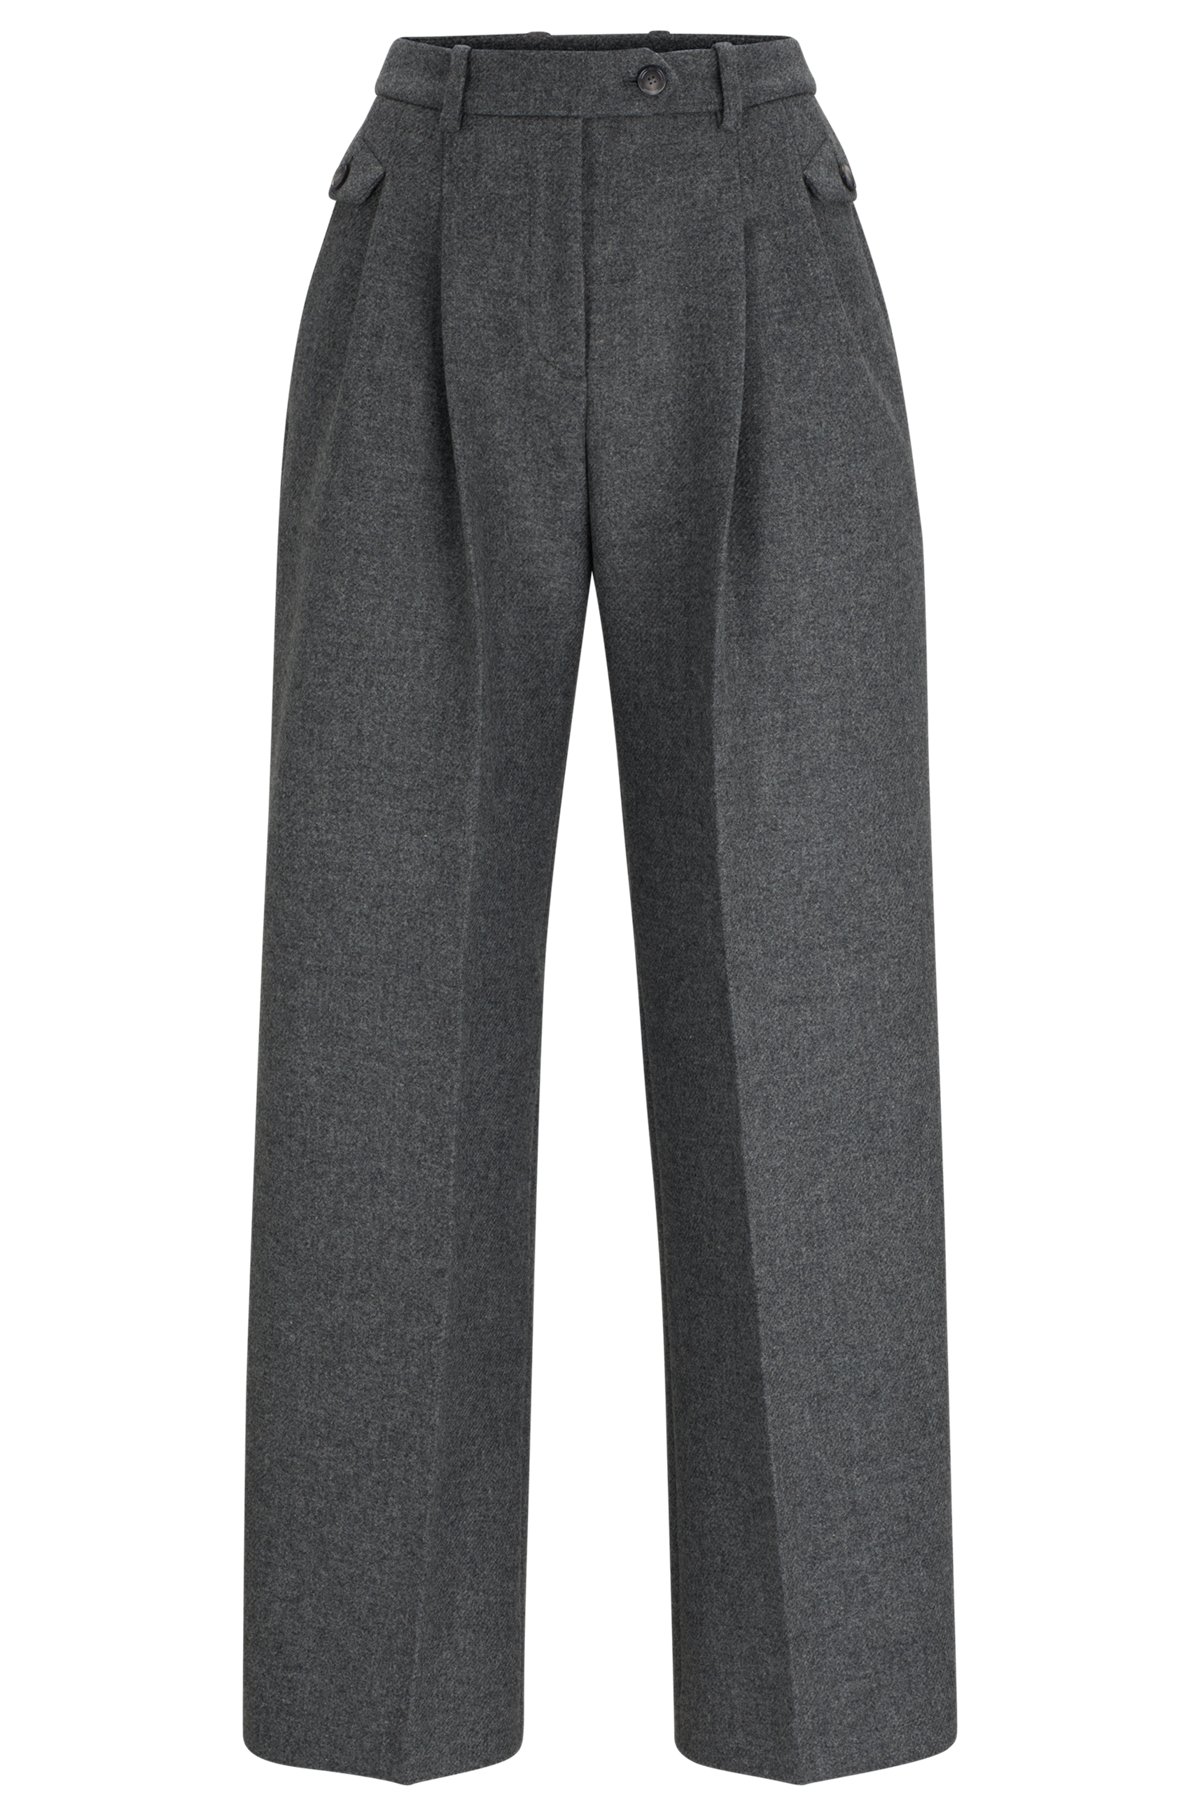 BOSS - Relaxed-fit trousers in a melange wool blend